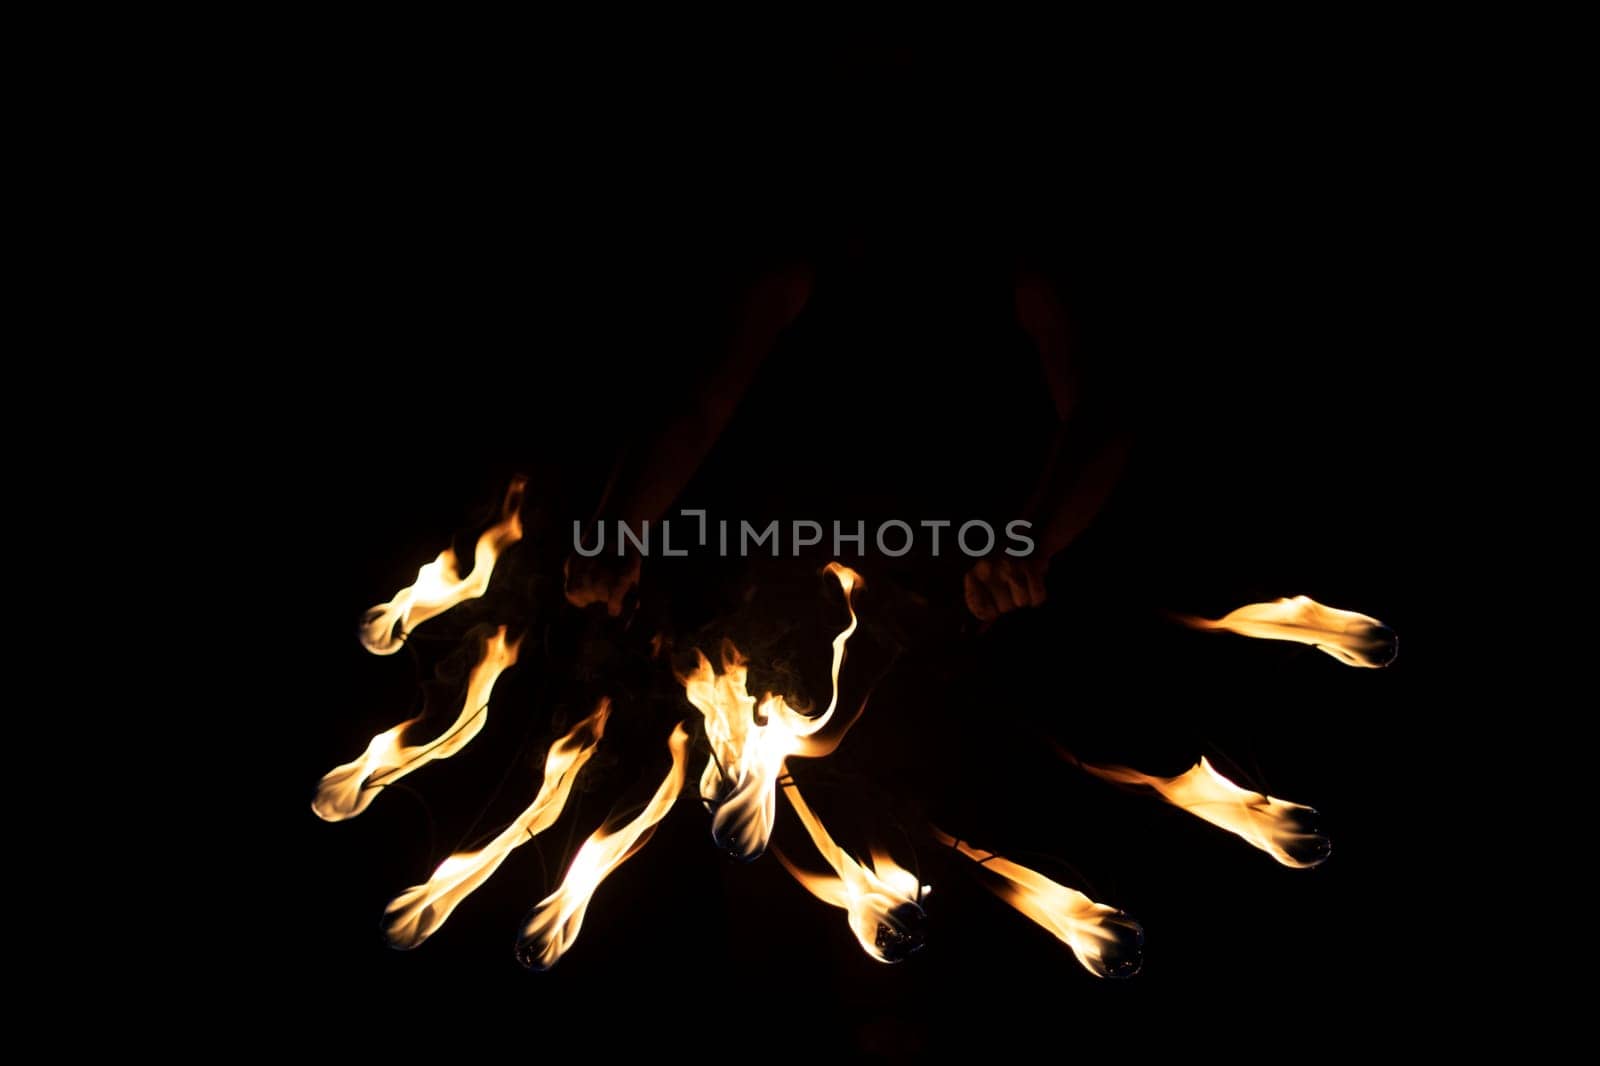 Lights in dark. Burning flames at night. Texture of burning fuel. Details of fire show.